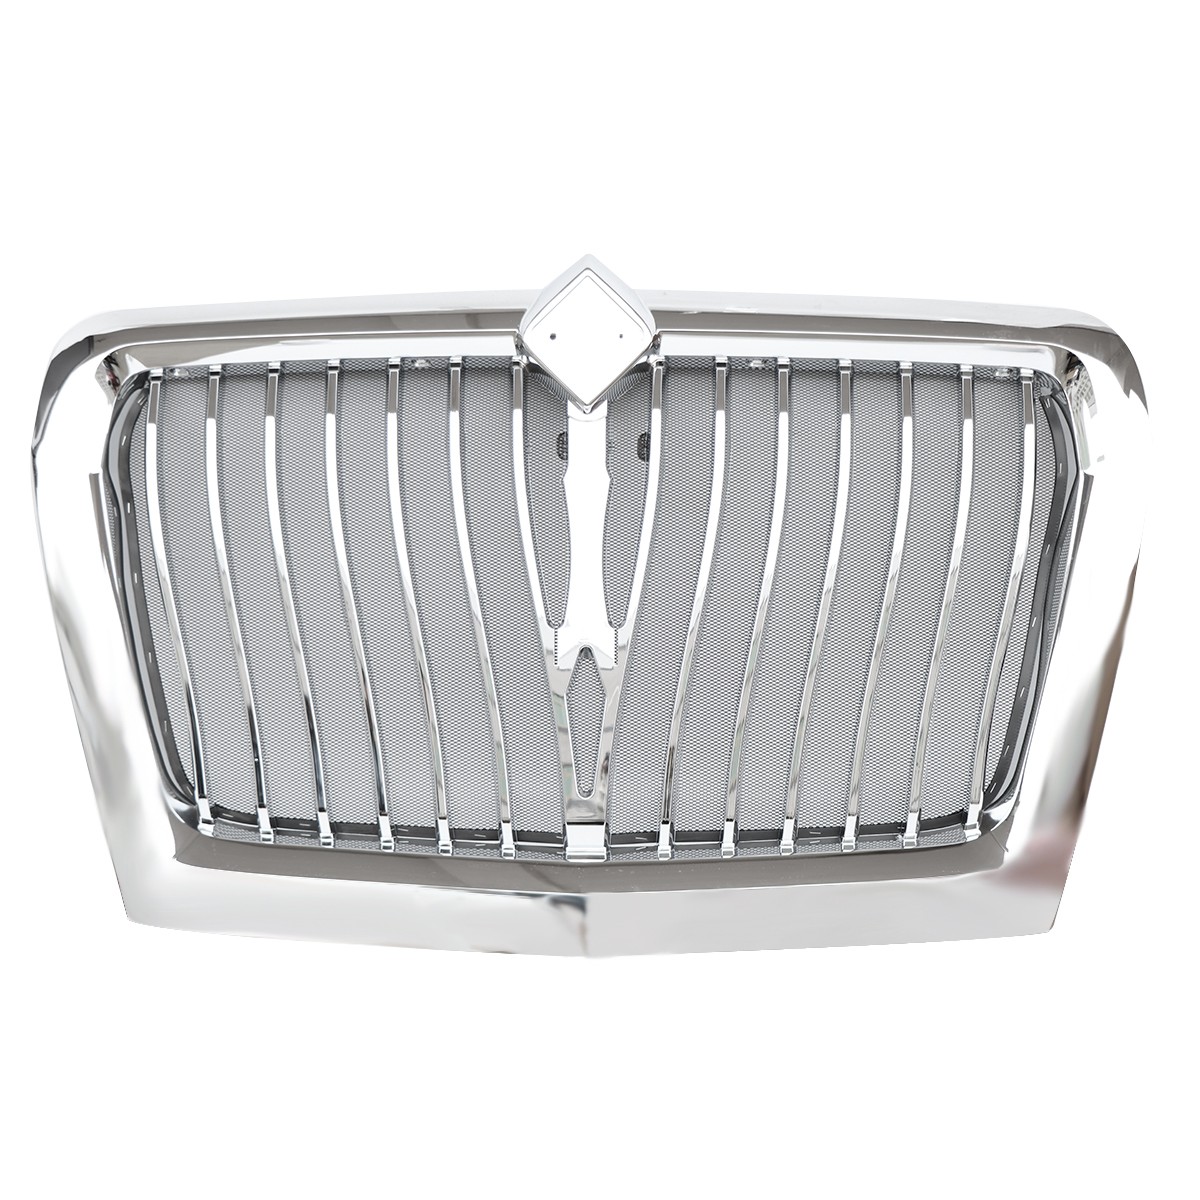 Main Grille Chrome With Bug Screen for 2018+ International LT625